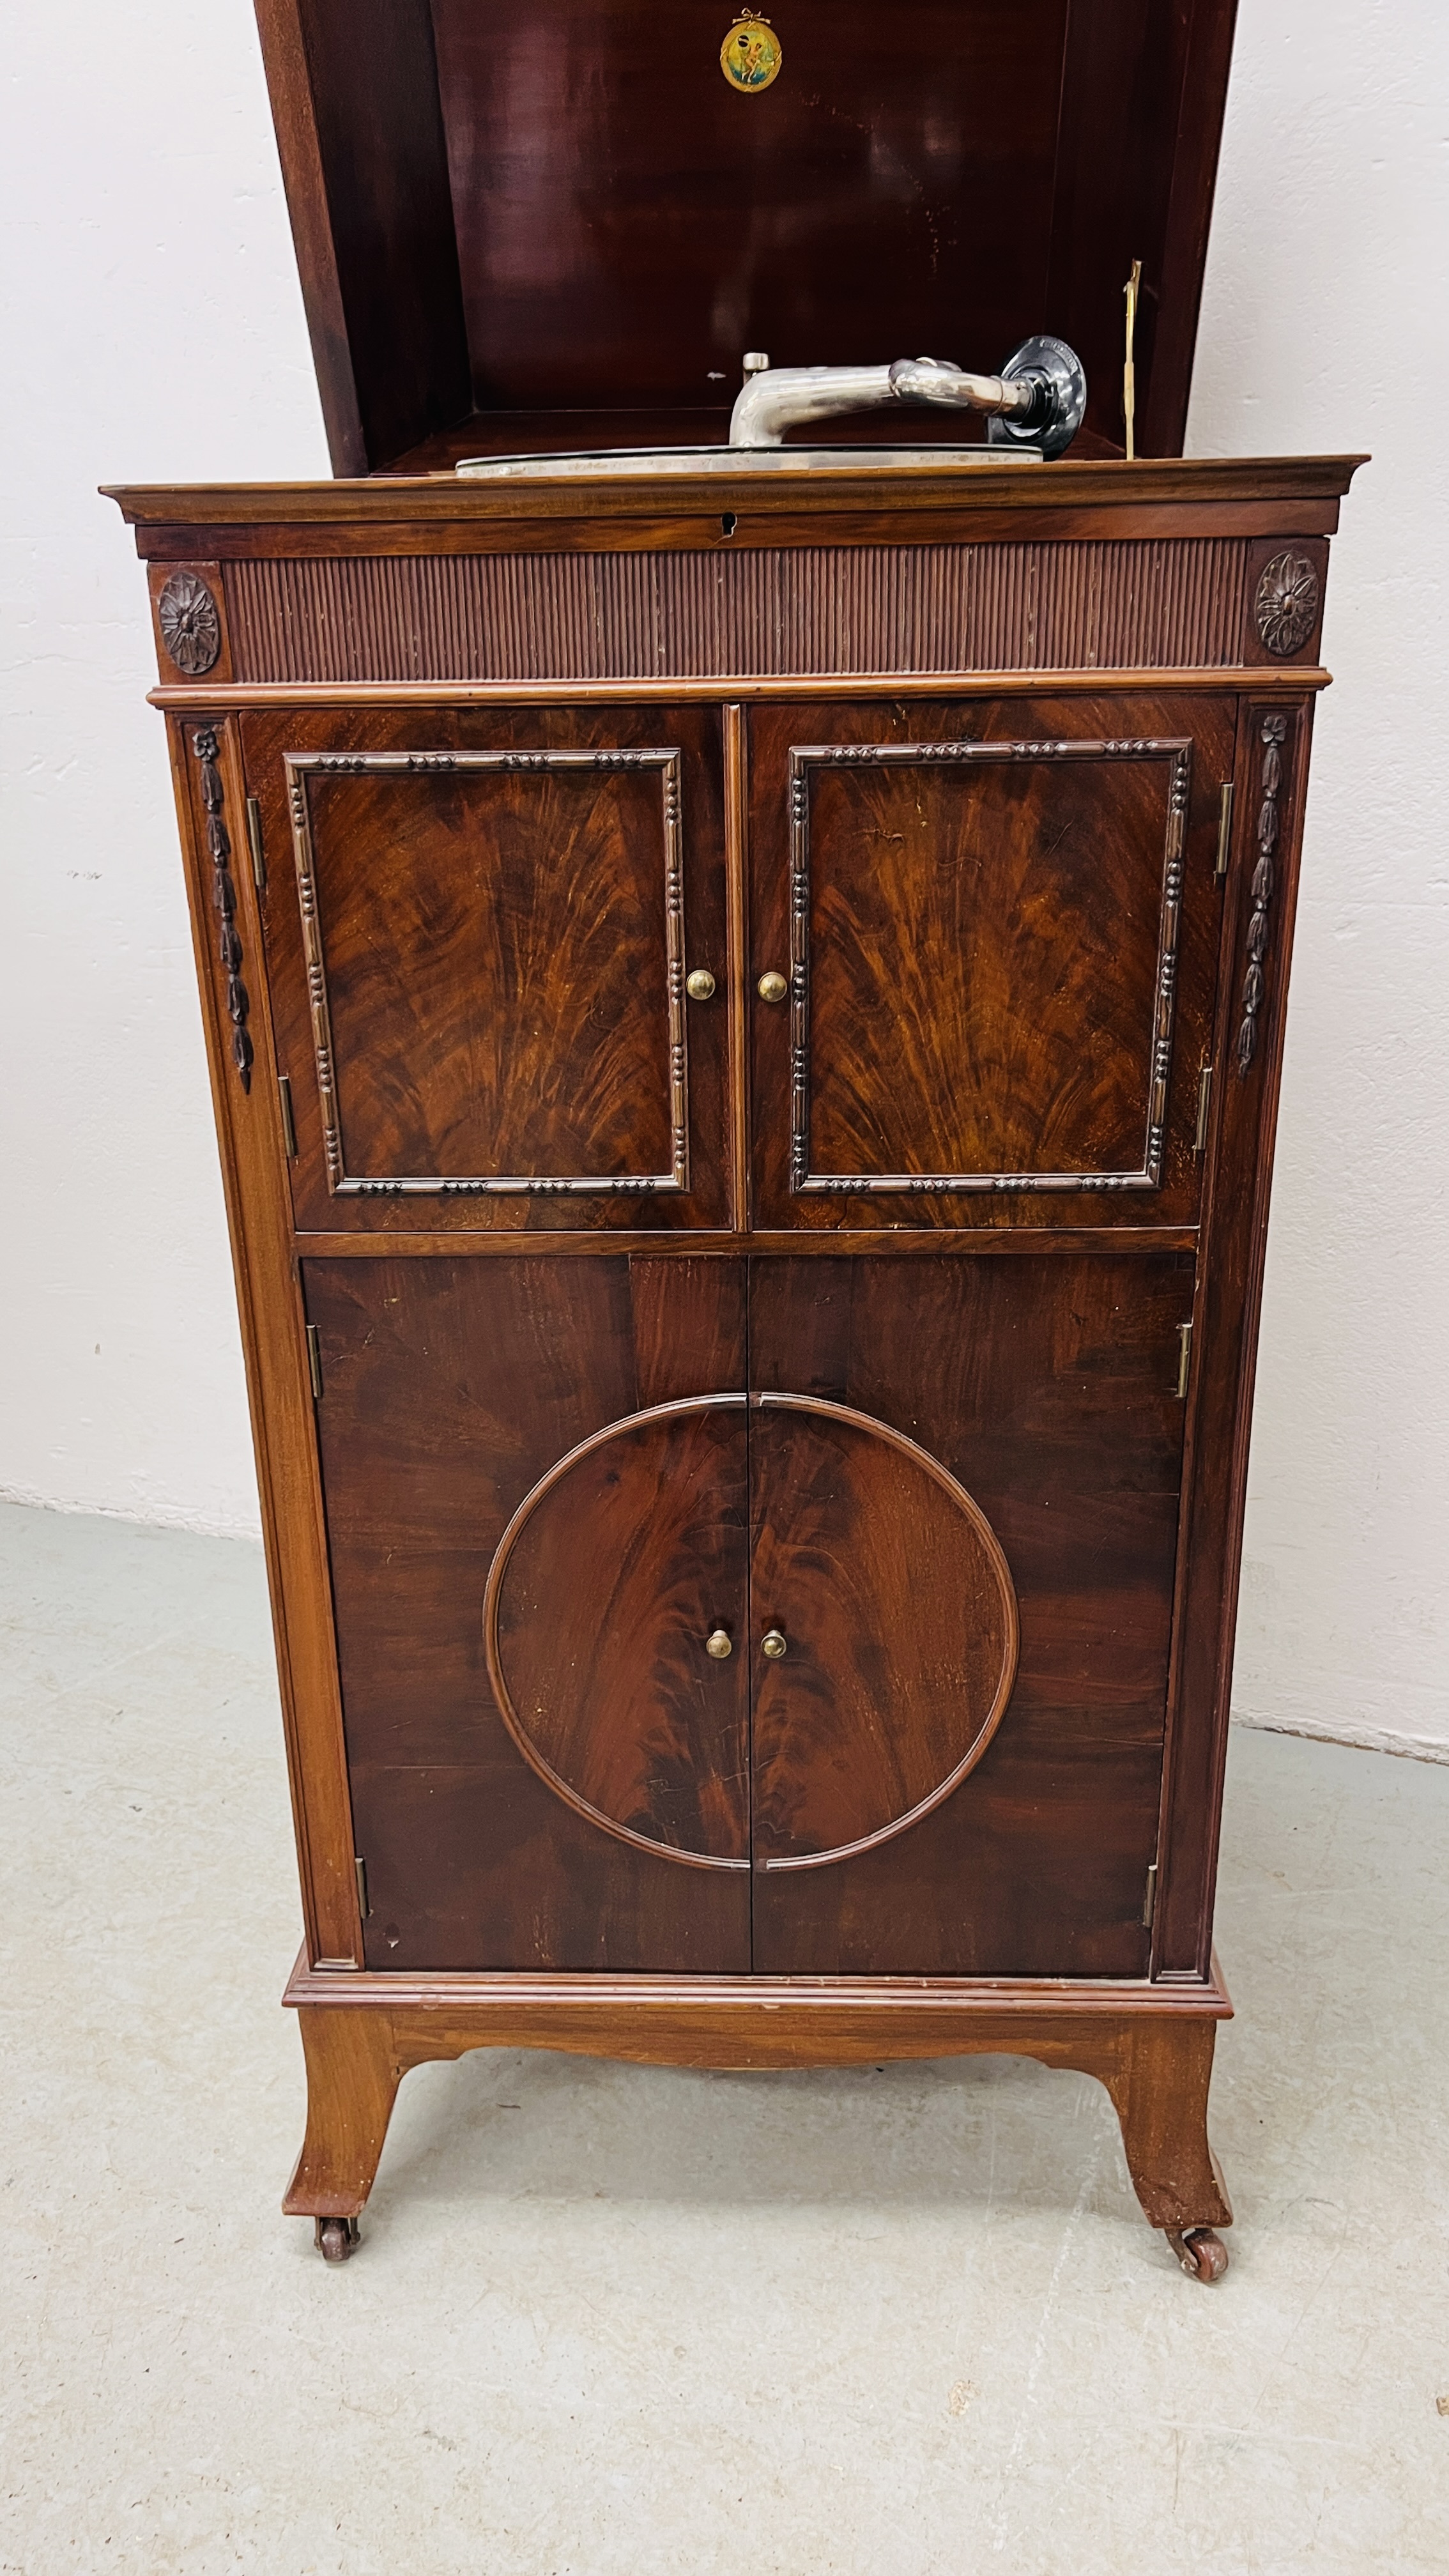 AN EARLY C20TH MAHOGANY CASED GRAMOPHONE, W 53CM, D 50CM, H 110CM. - Image 6 of 12